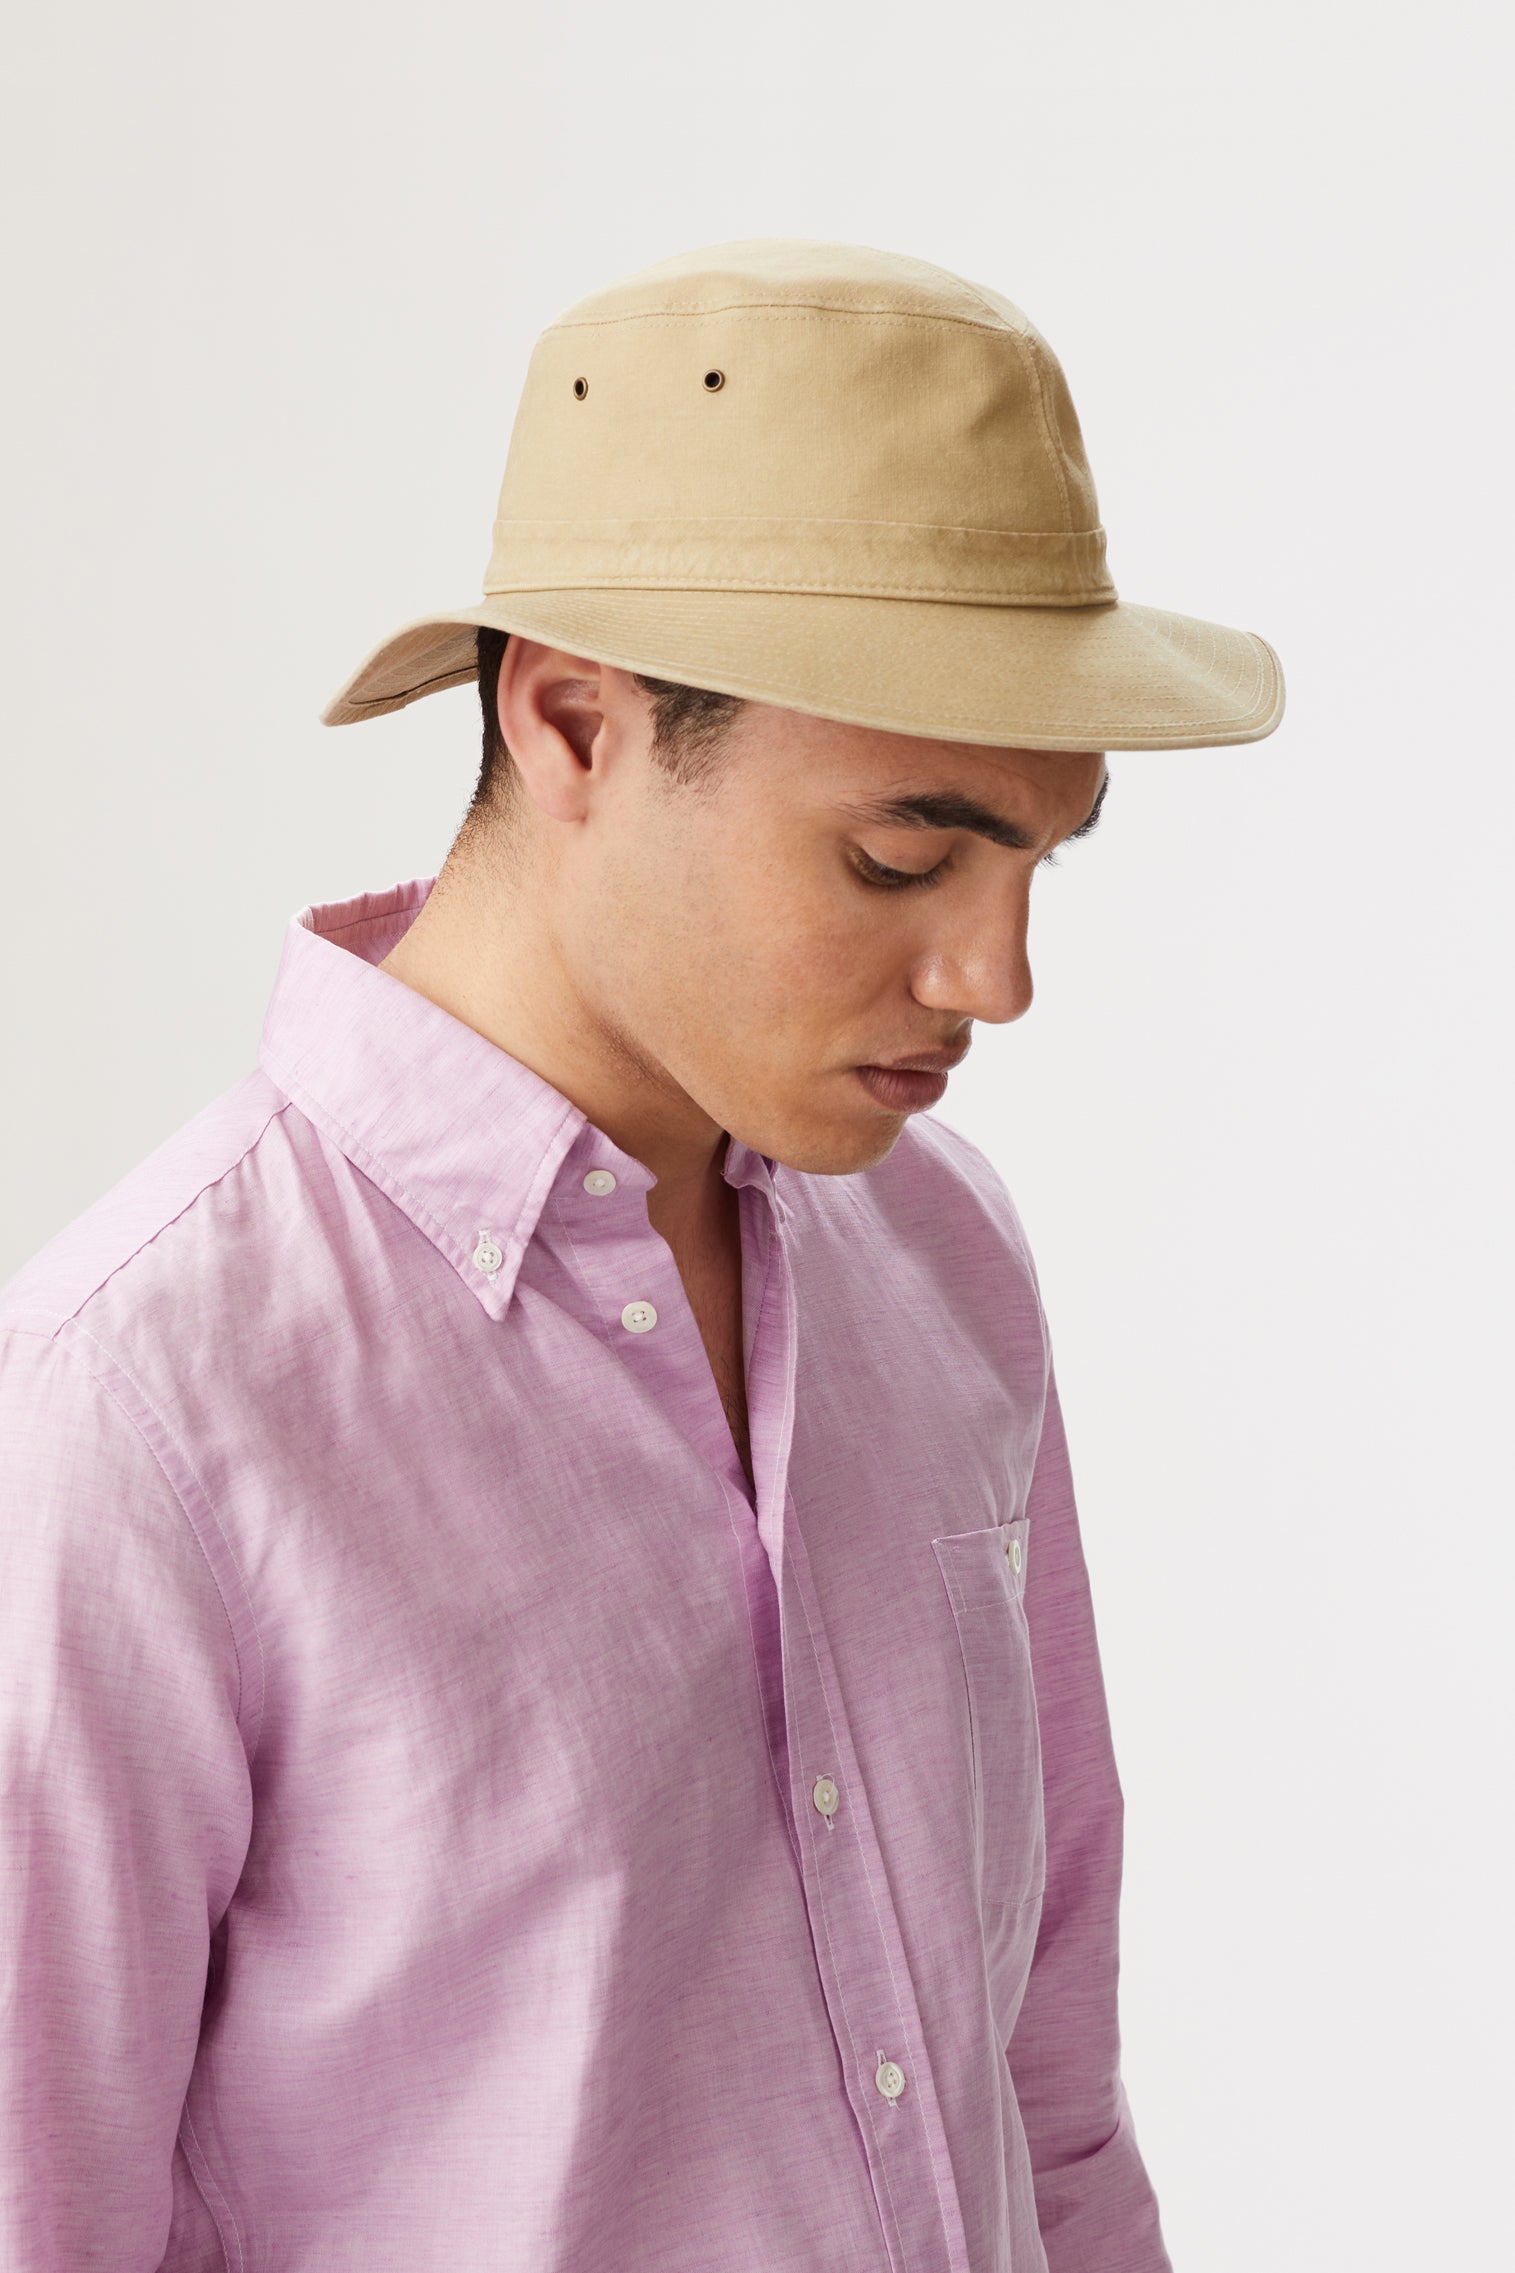 Capri Rollable Hat - Panamas, Straw and Sun Hats for Men - Lock & Co. Hatters London UK